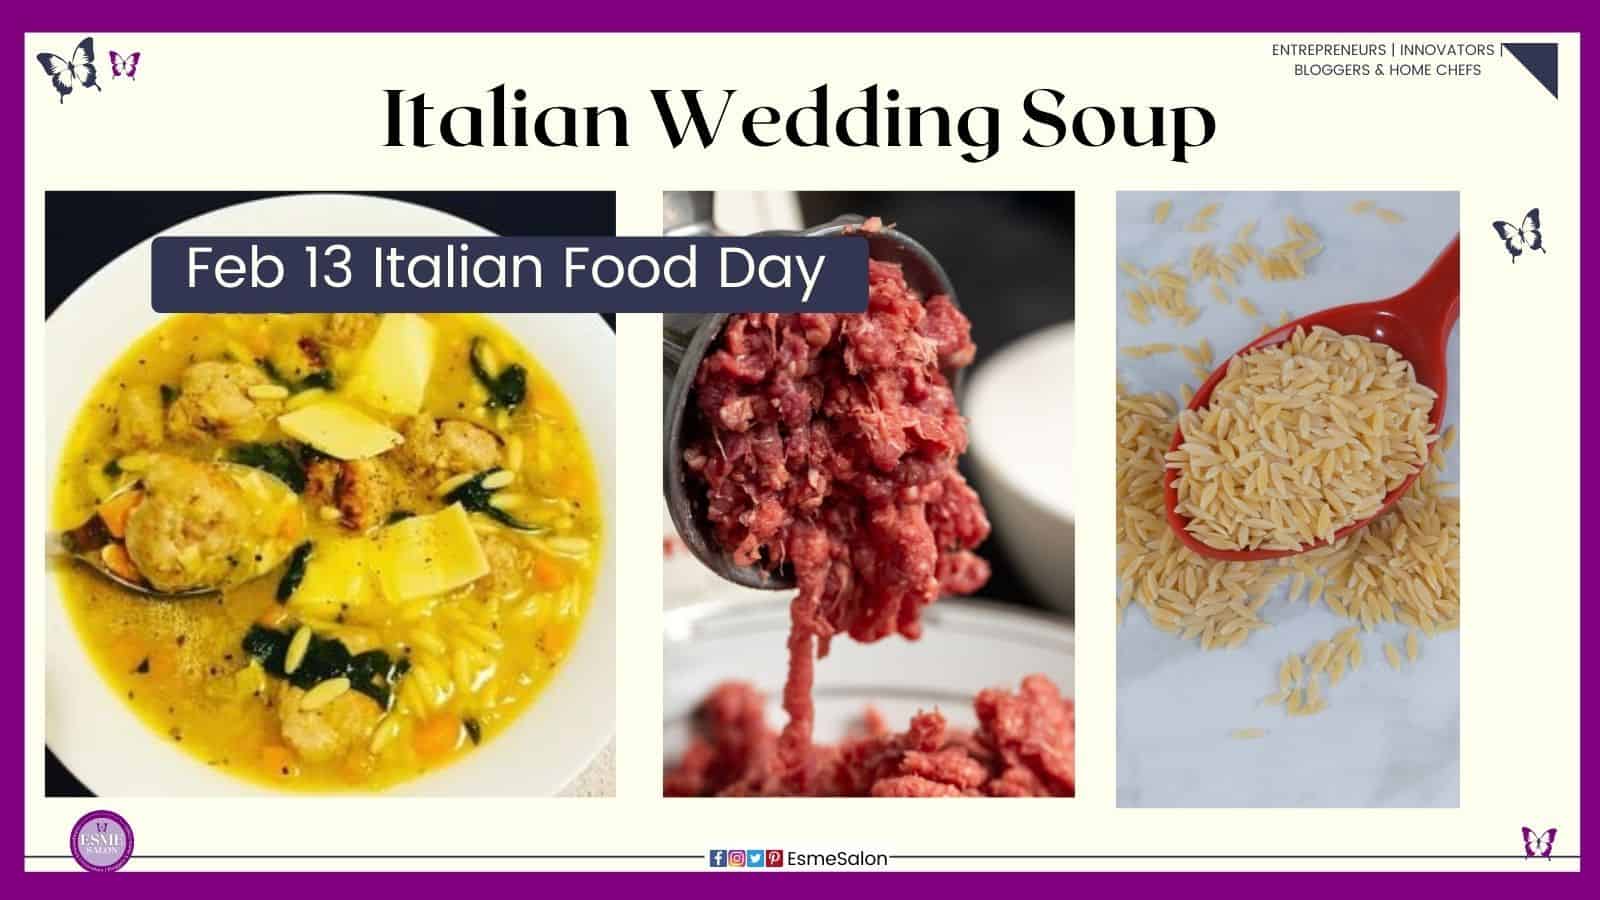 an image of a plate filled with Italian Wedding Soup with meatballs